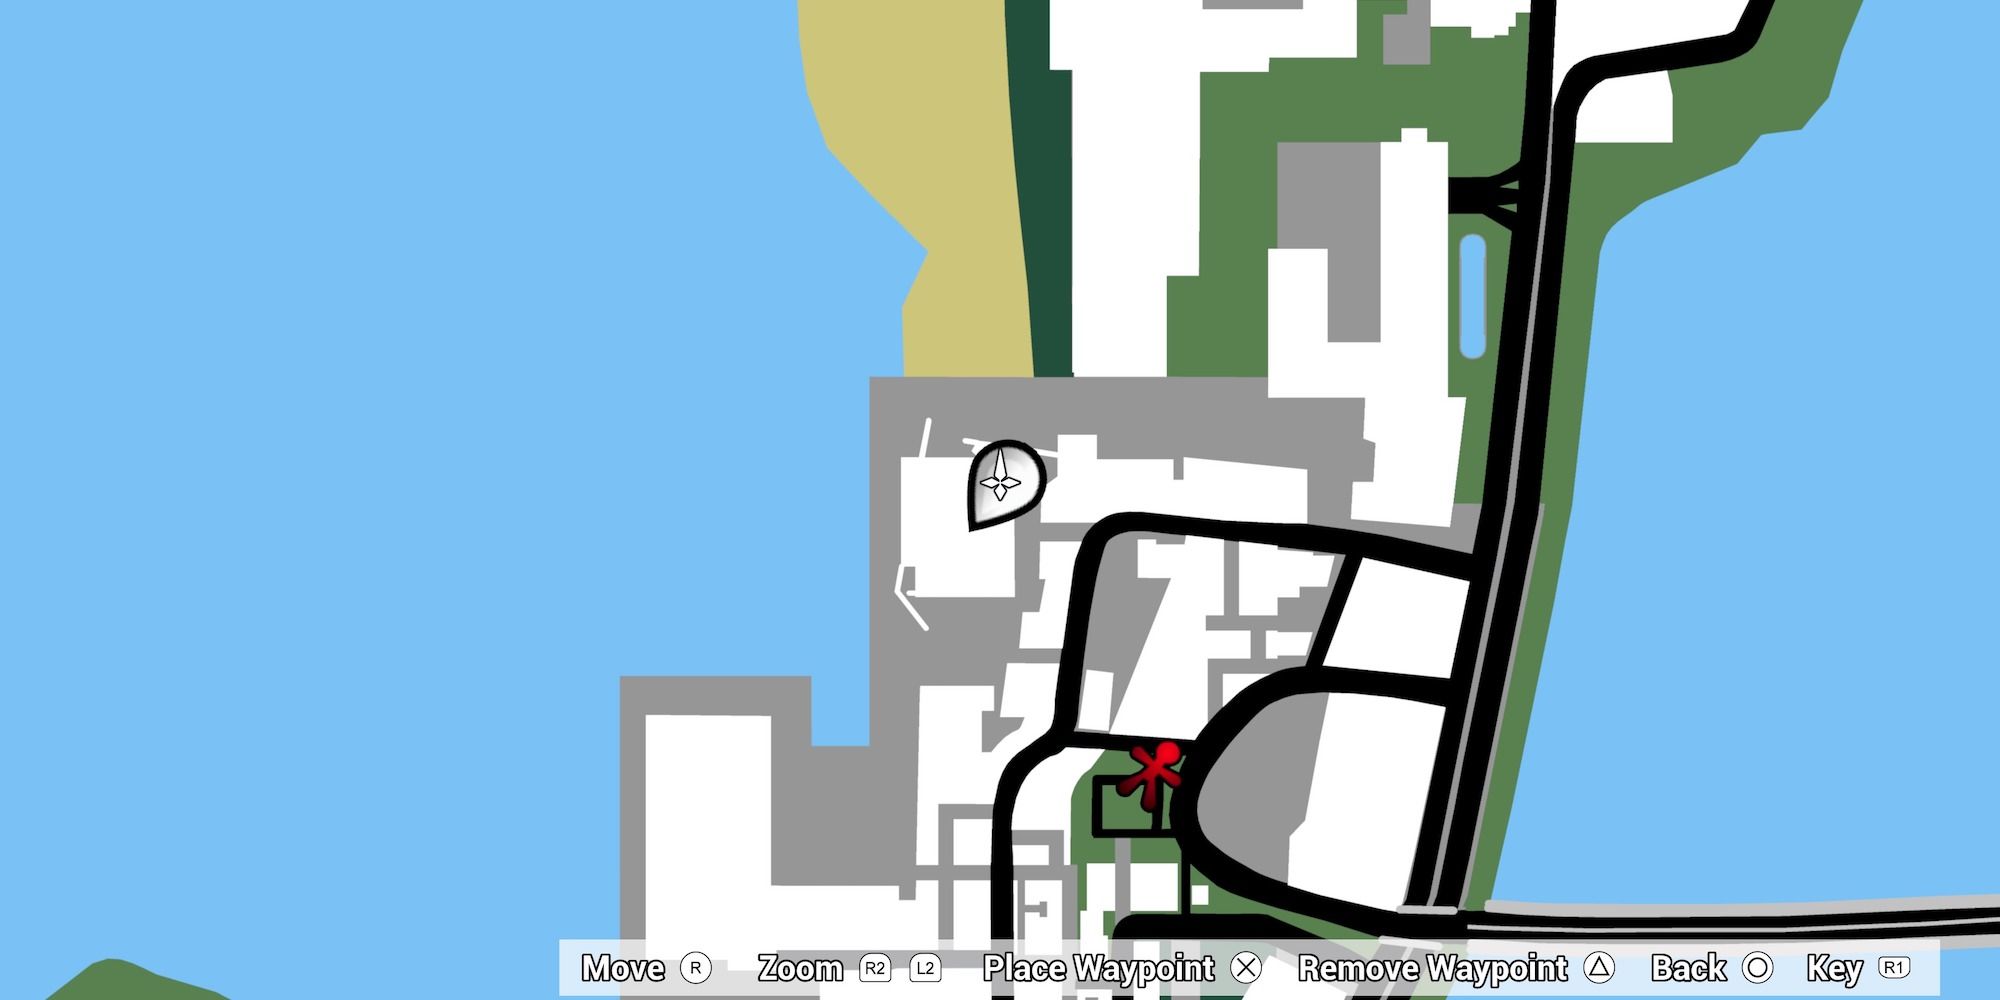 Phil's place on the vice city map